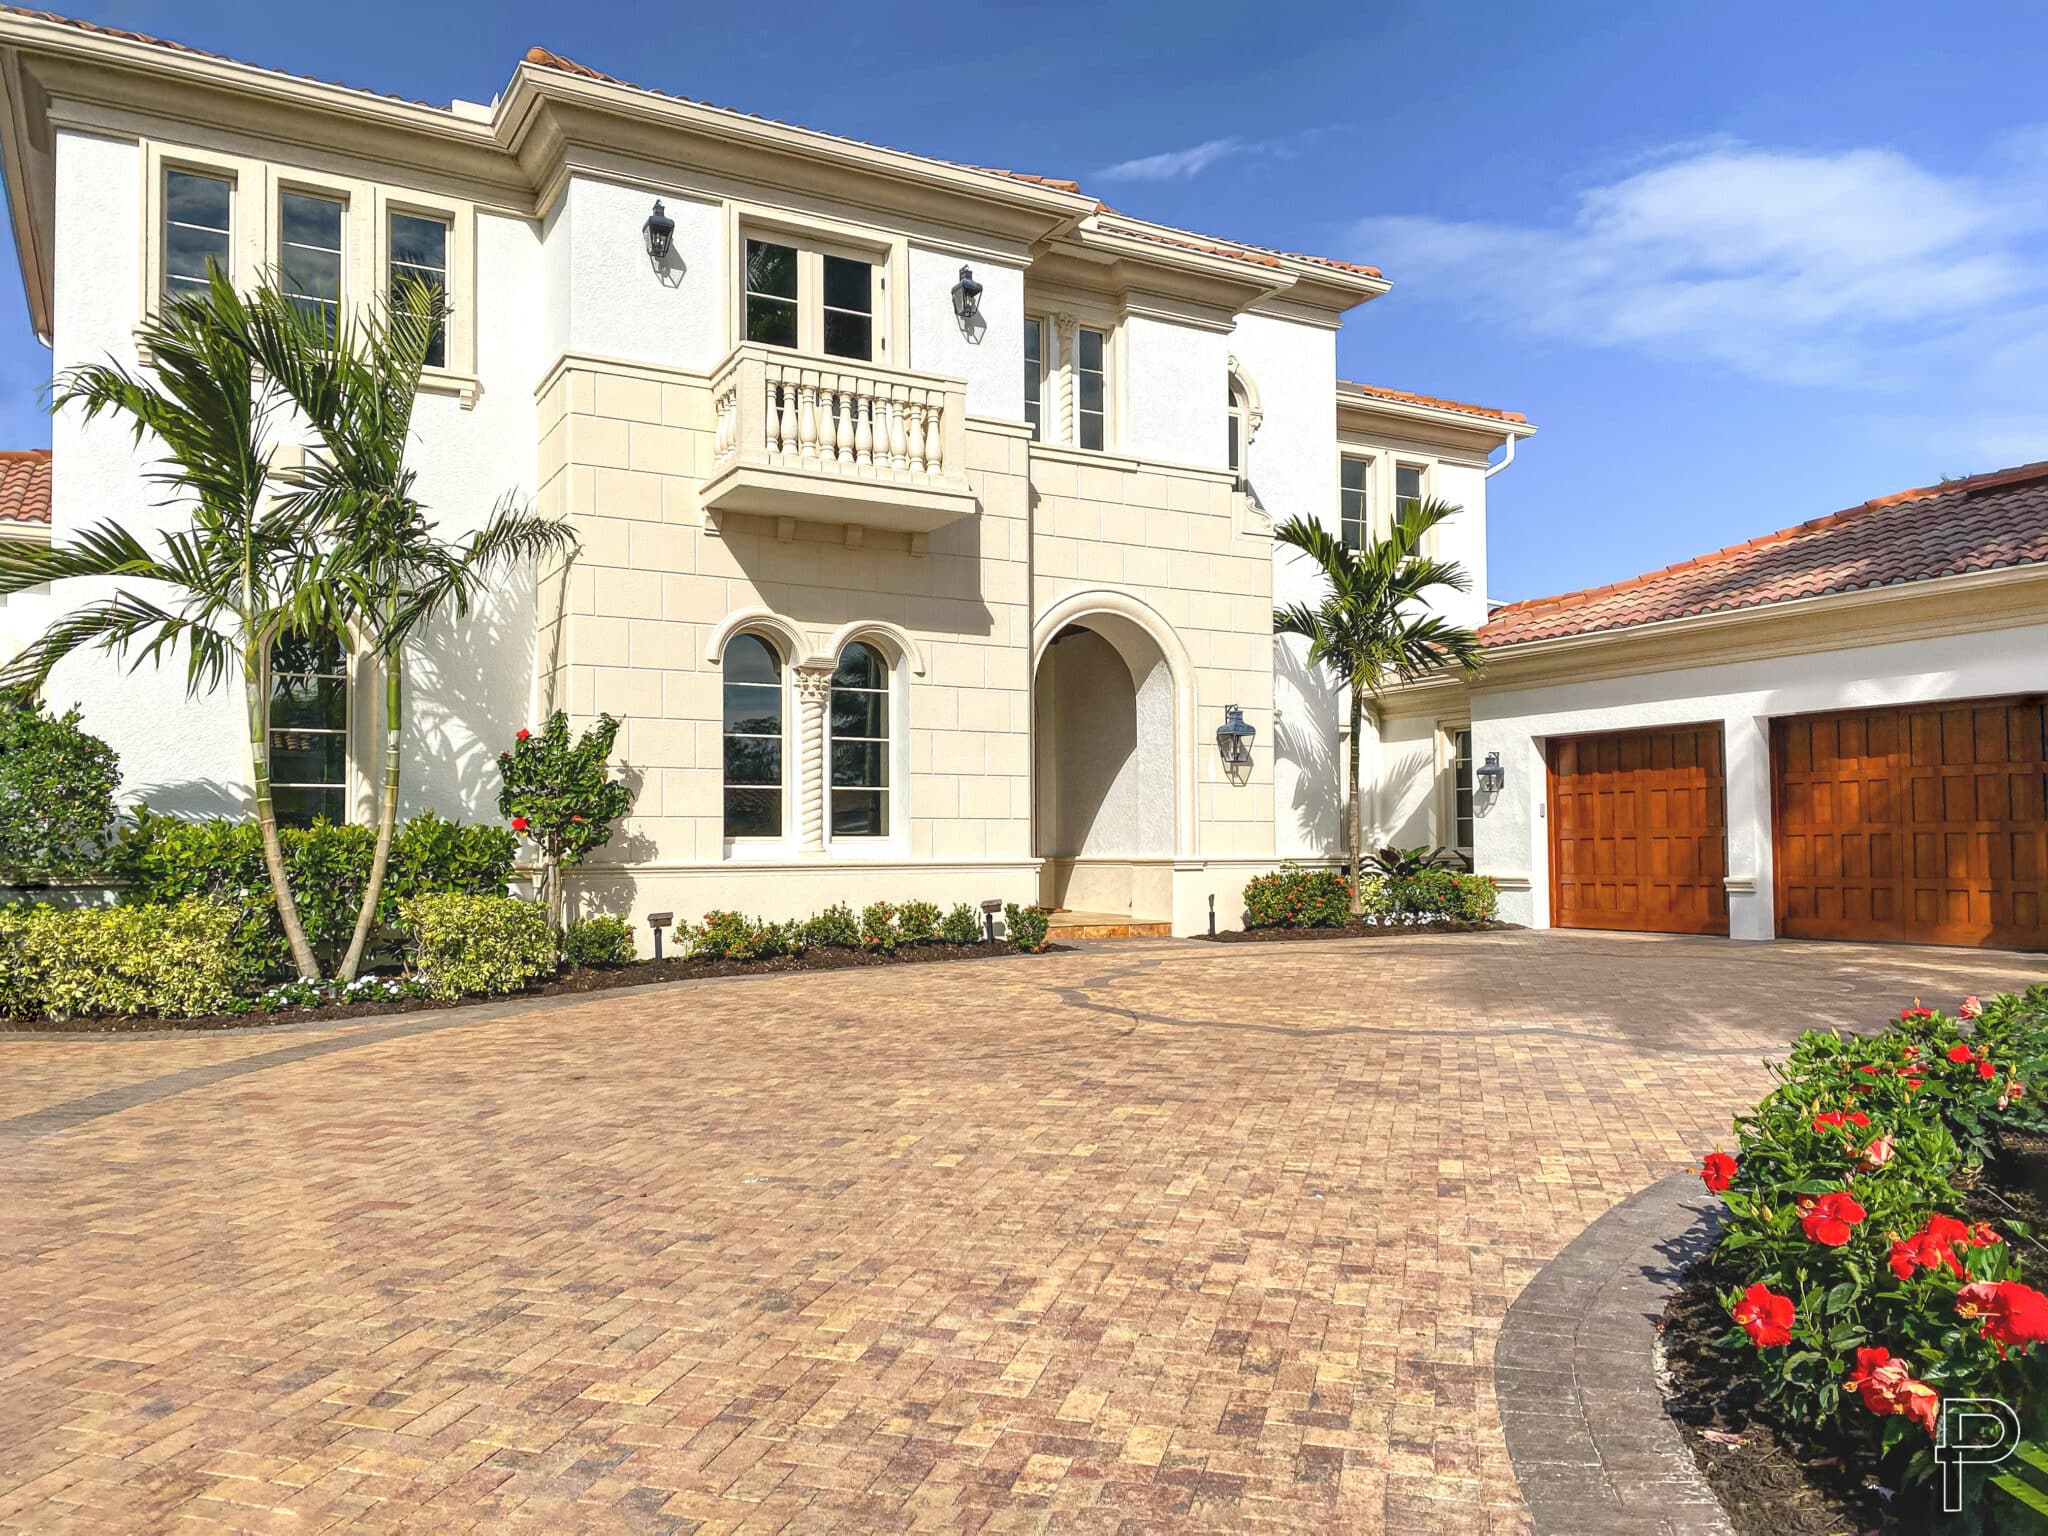 Pavers Naples FL: Paver Installation & Hardscapes Installers Marco ...